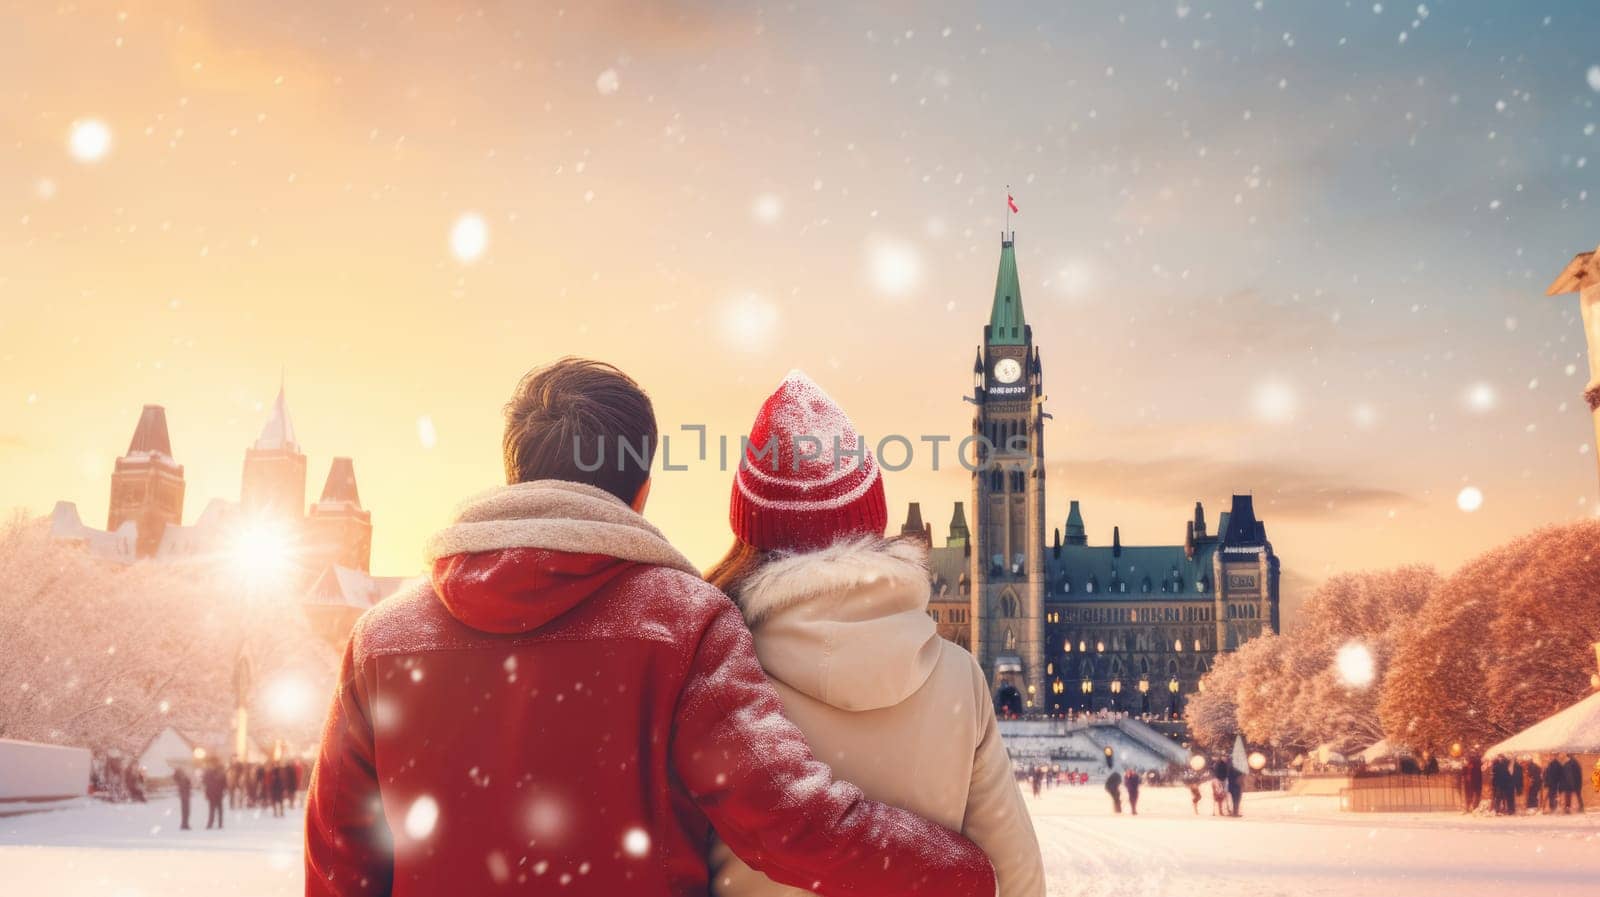 Happy Canadian wearing winter clothes celebrating Christmas holiday at Parliament Hill. People having fun hanging out together walking on city street. Winter holidays and relationship concept by JuliaDorian